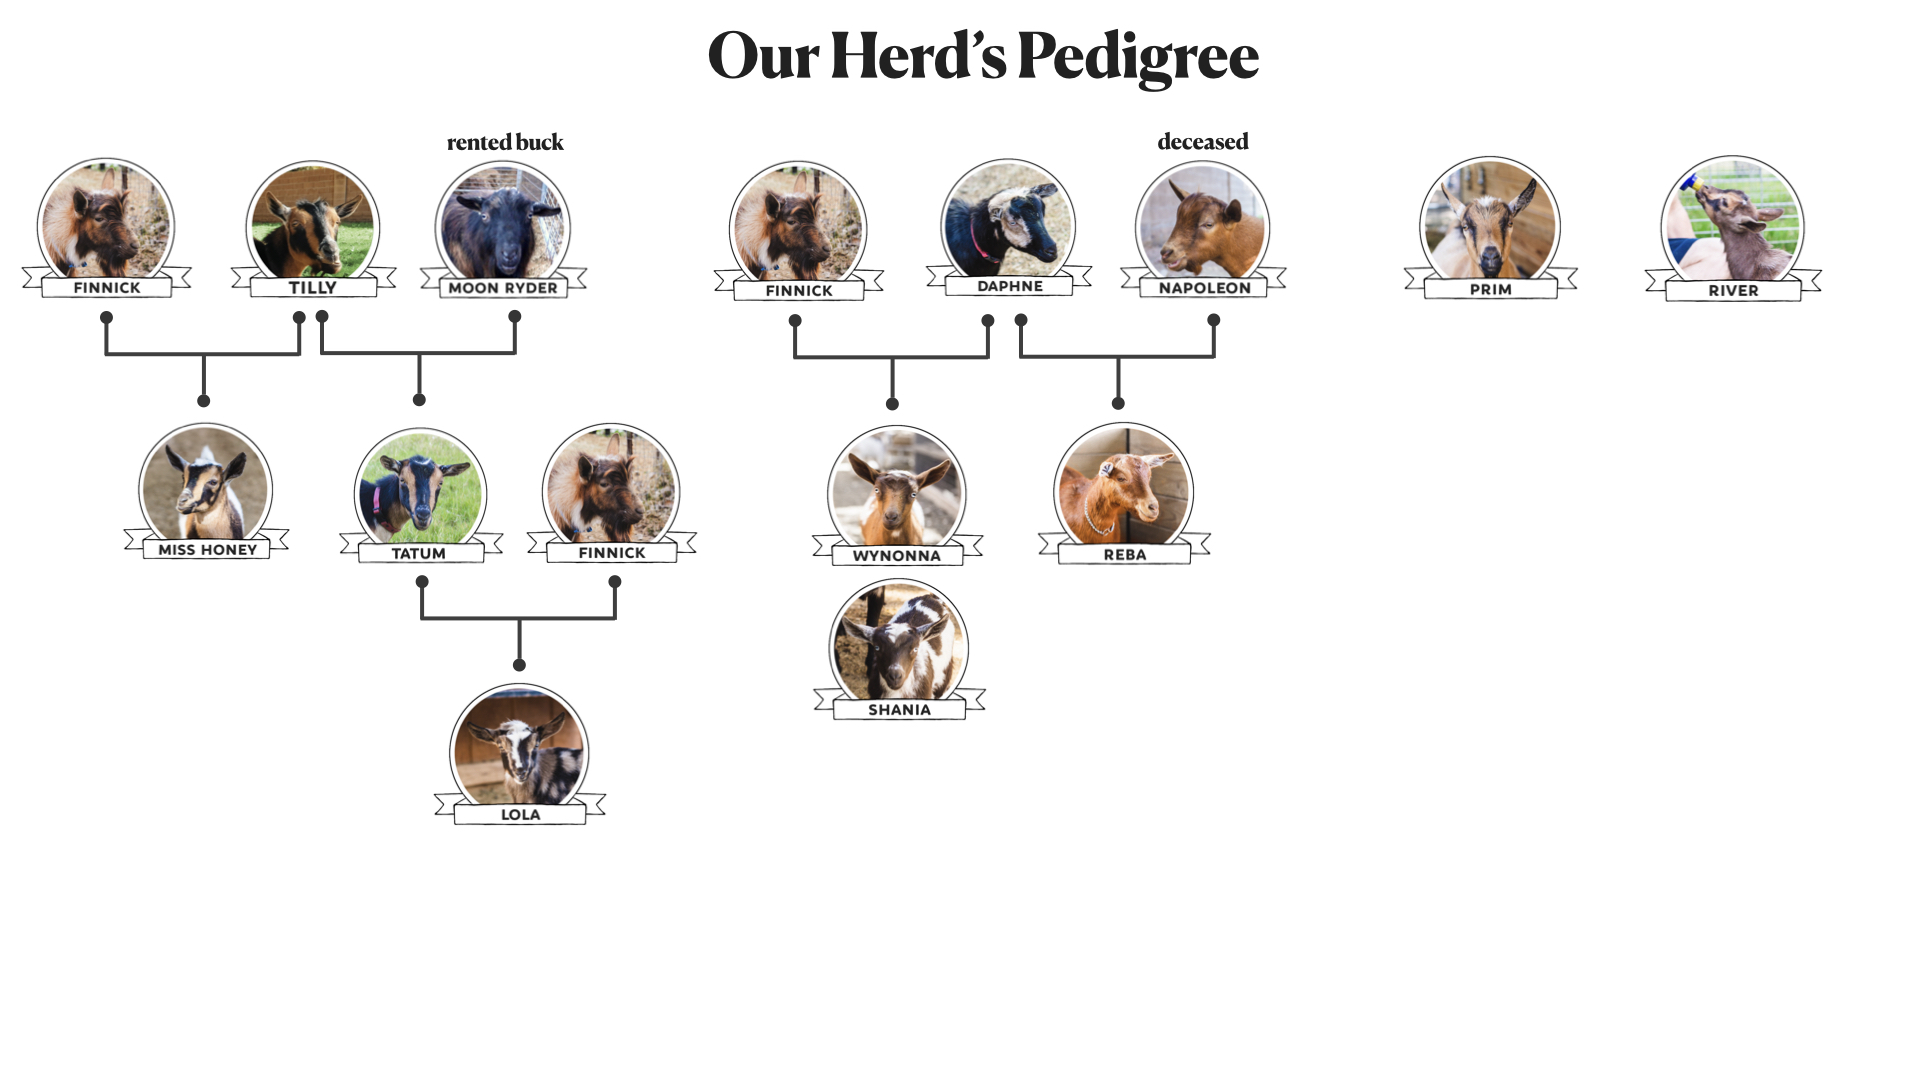 Our-Goat-Family-Tree.001